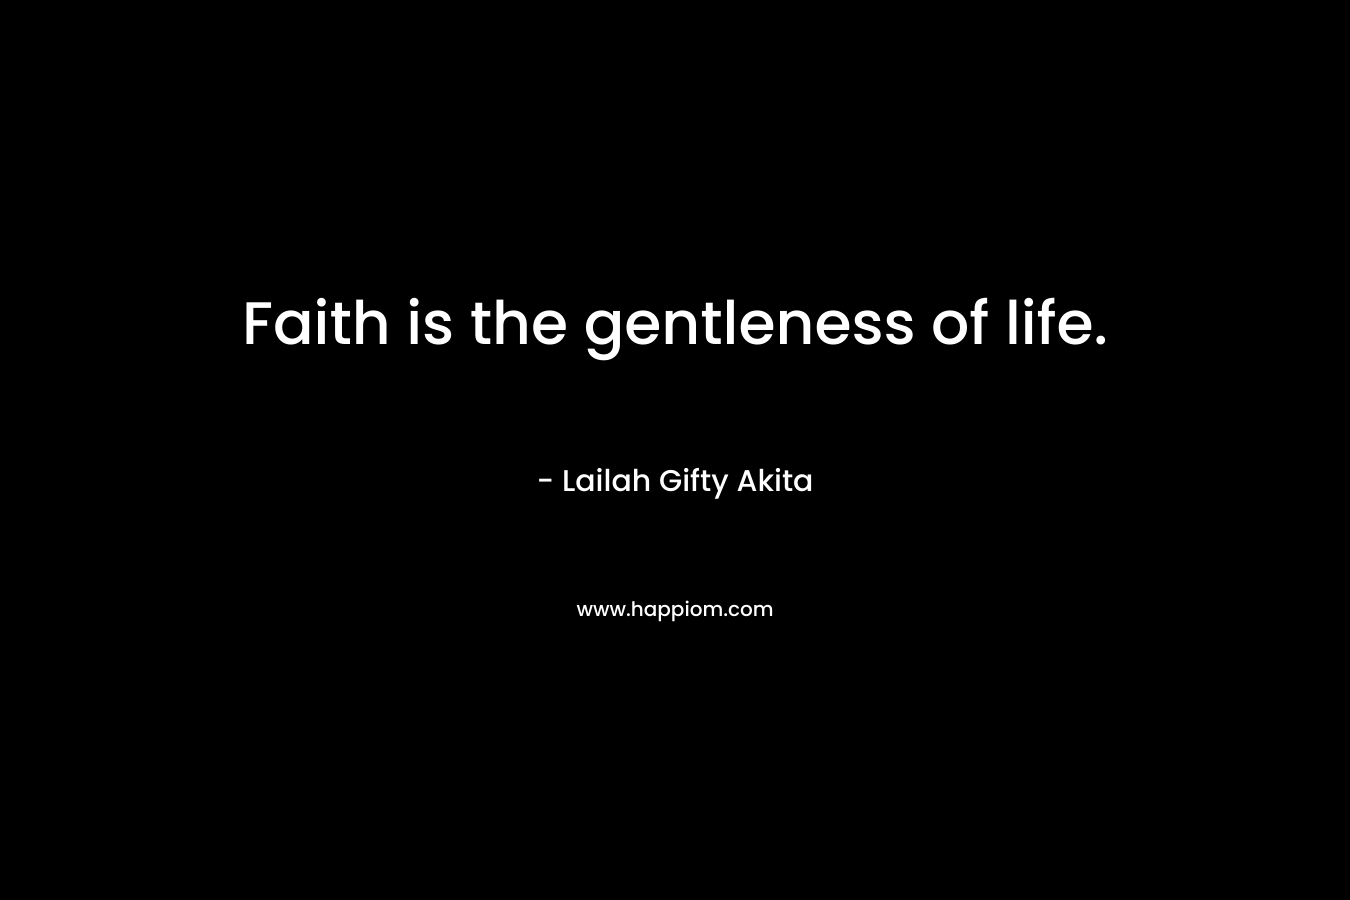 Faith is the gentleness of life.